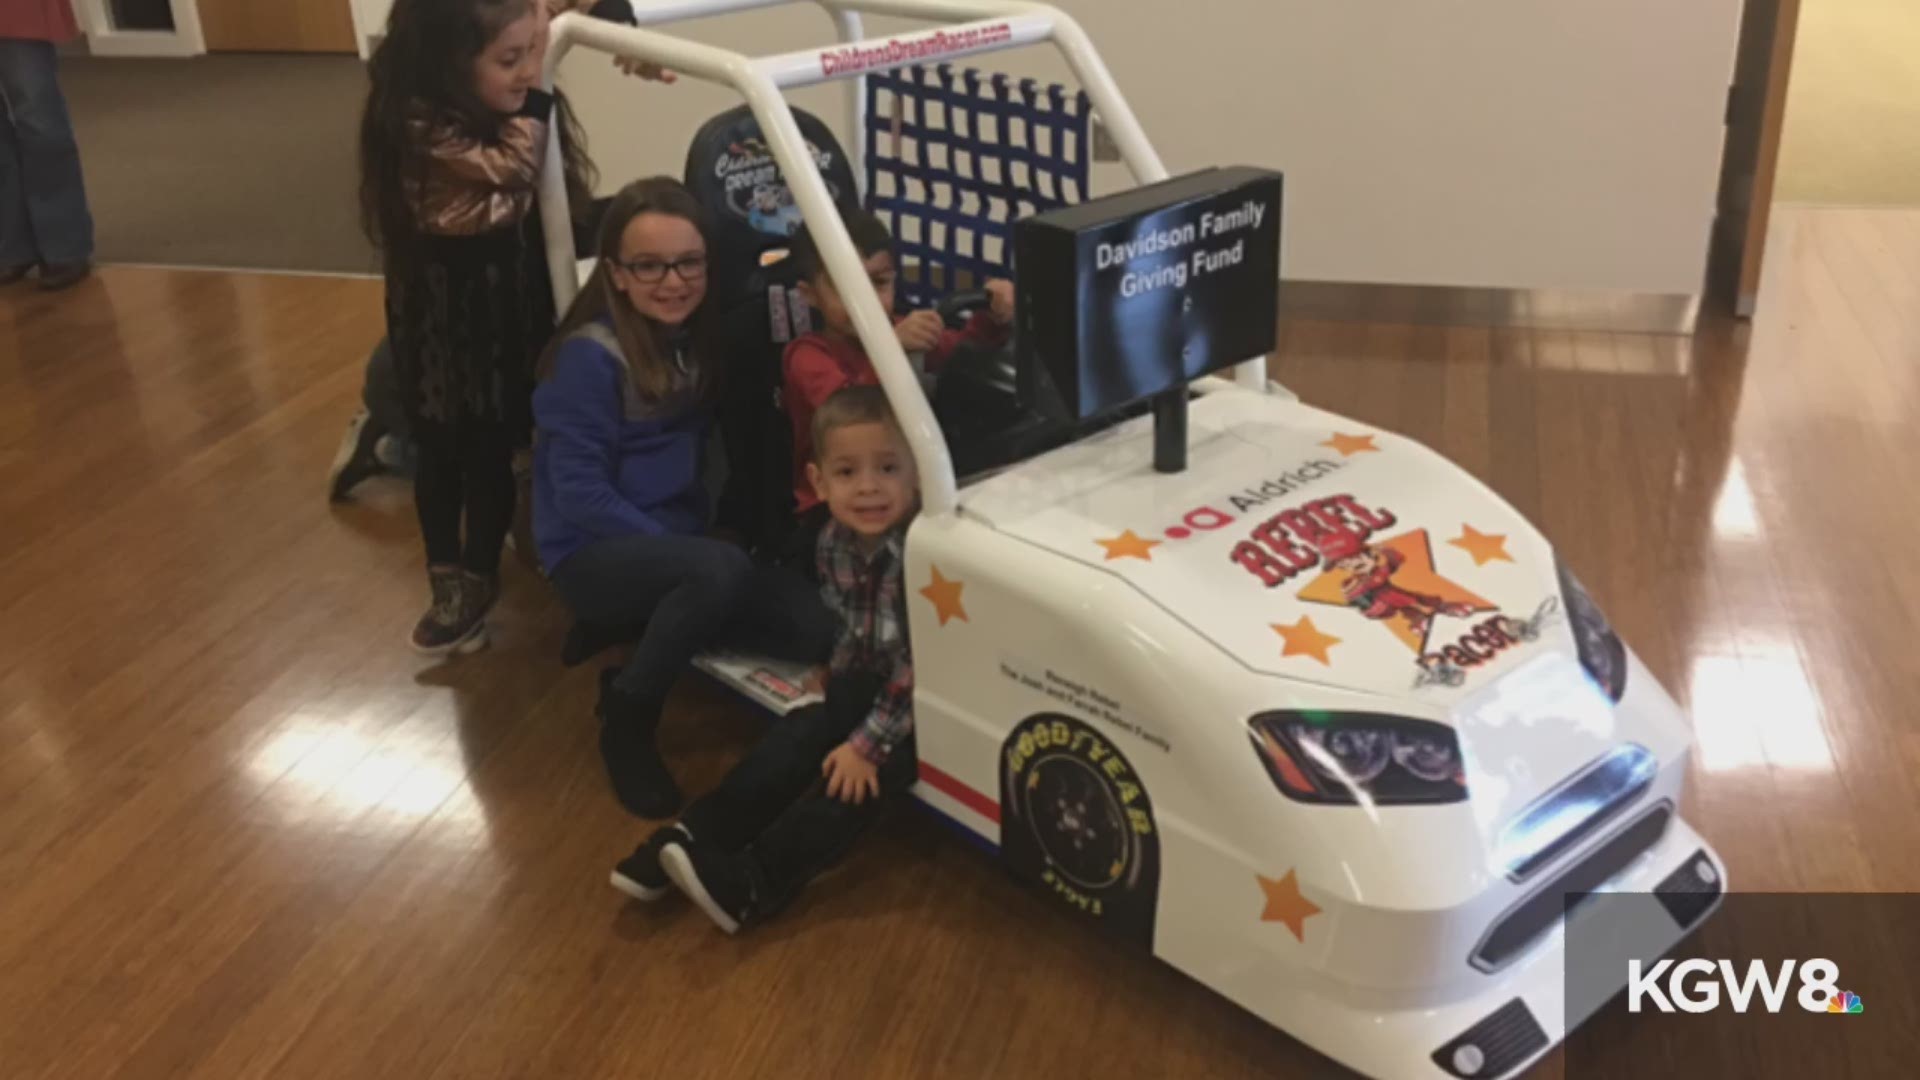 The car was unveiled at Randall Children's Hospital in Portland